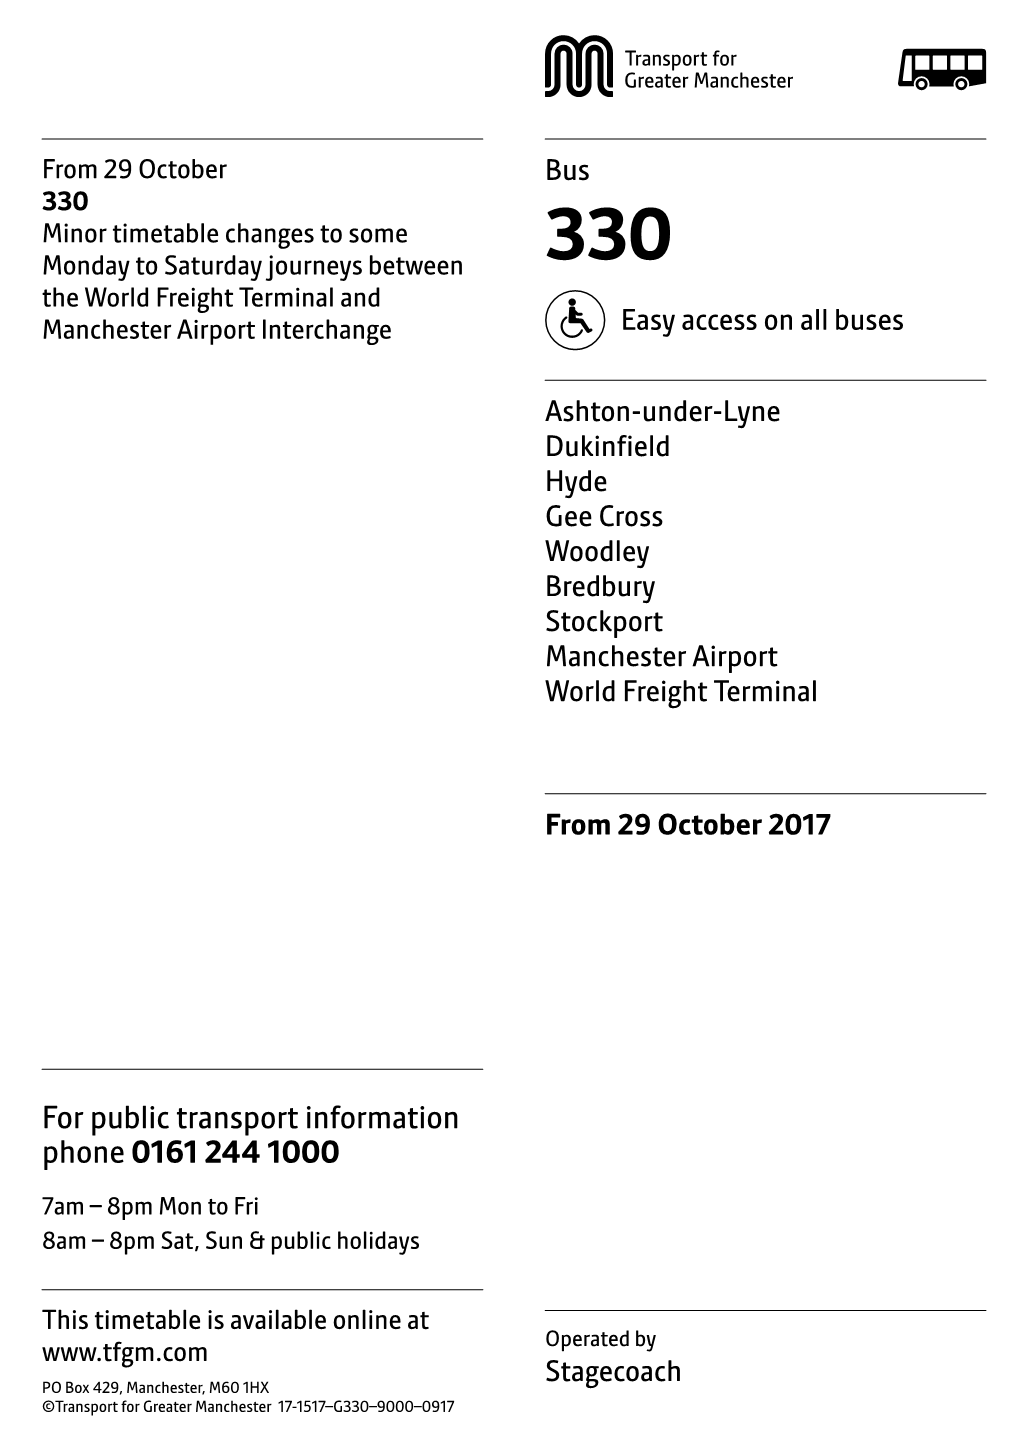 330 Minor Timetable Changes to Some Monday to Saturday Journeys Between 330 the World Freight Terminal and Manchester Airport Interchange Easy Access on All Buses